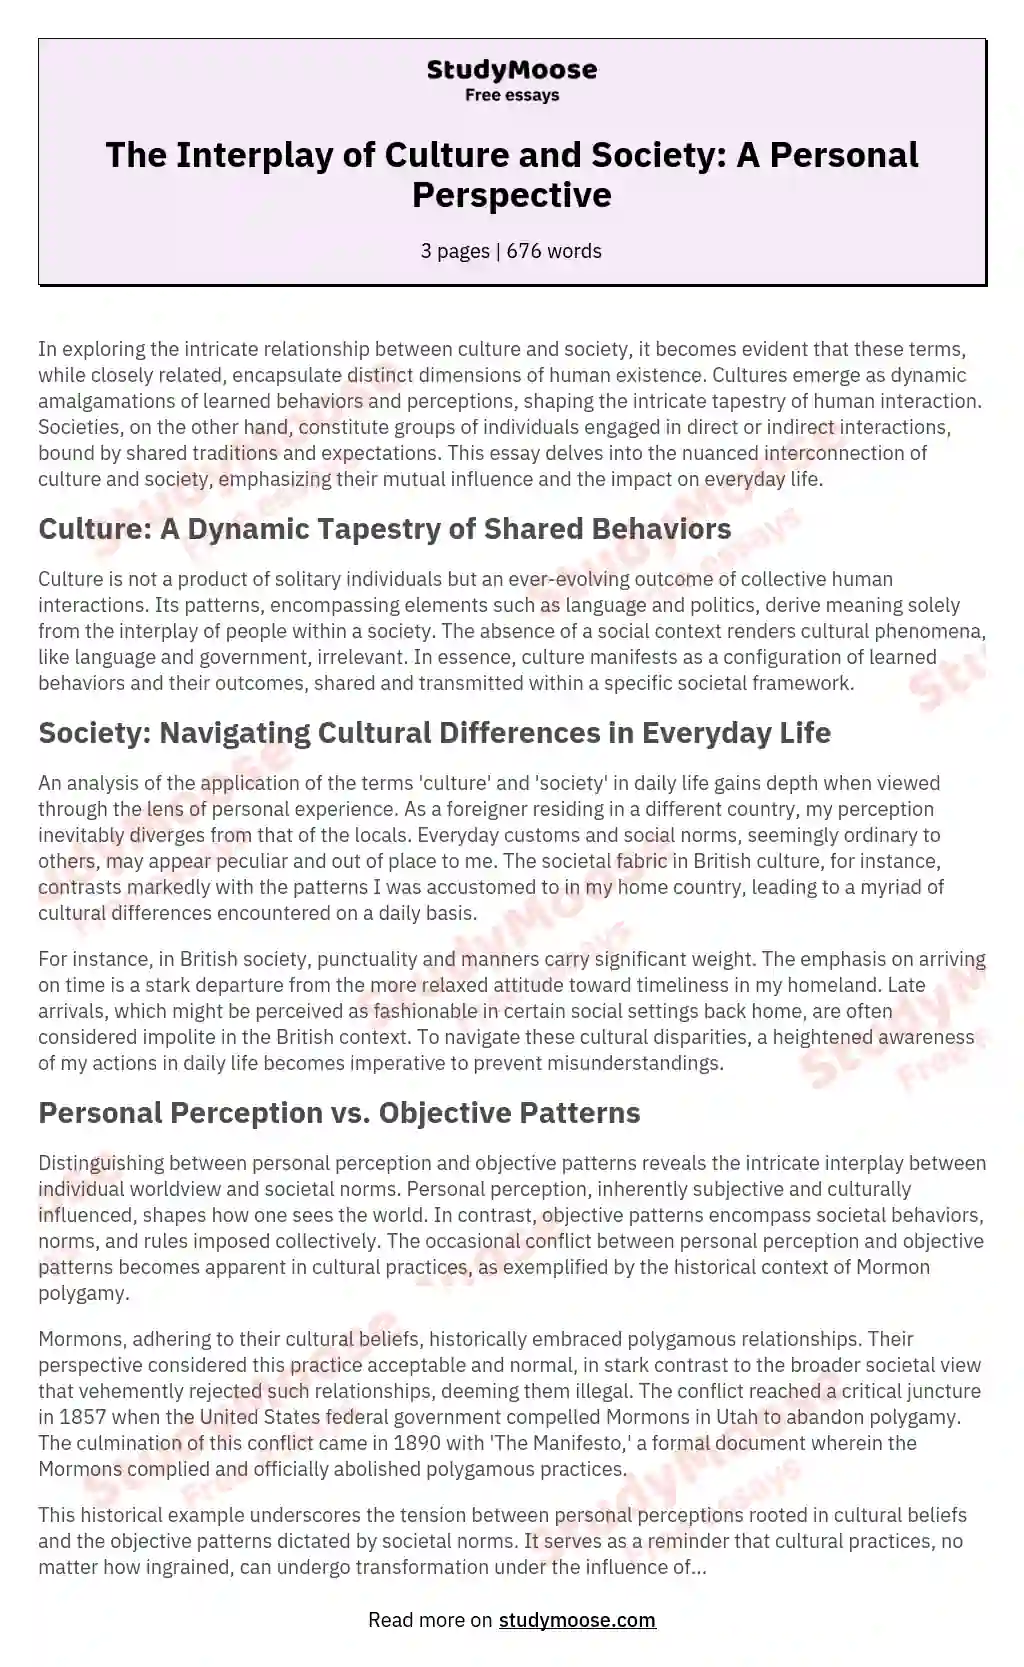 The Interplay of Culture and Society: A Personal Perspective essay